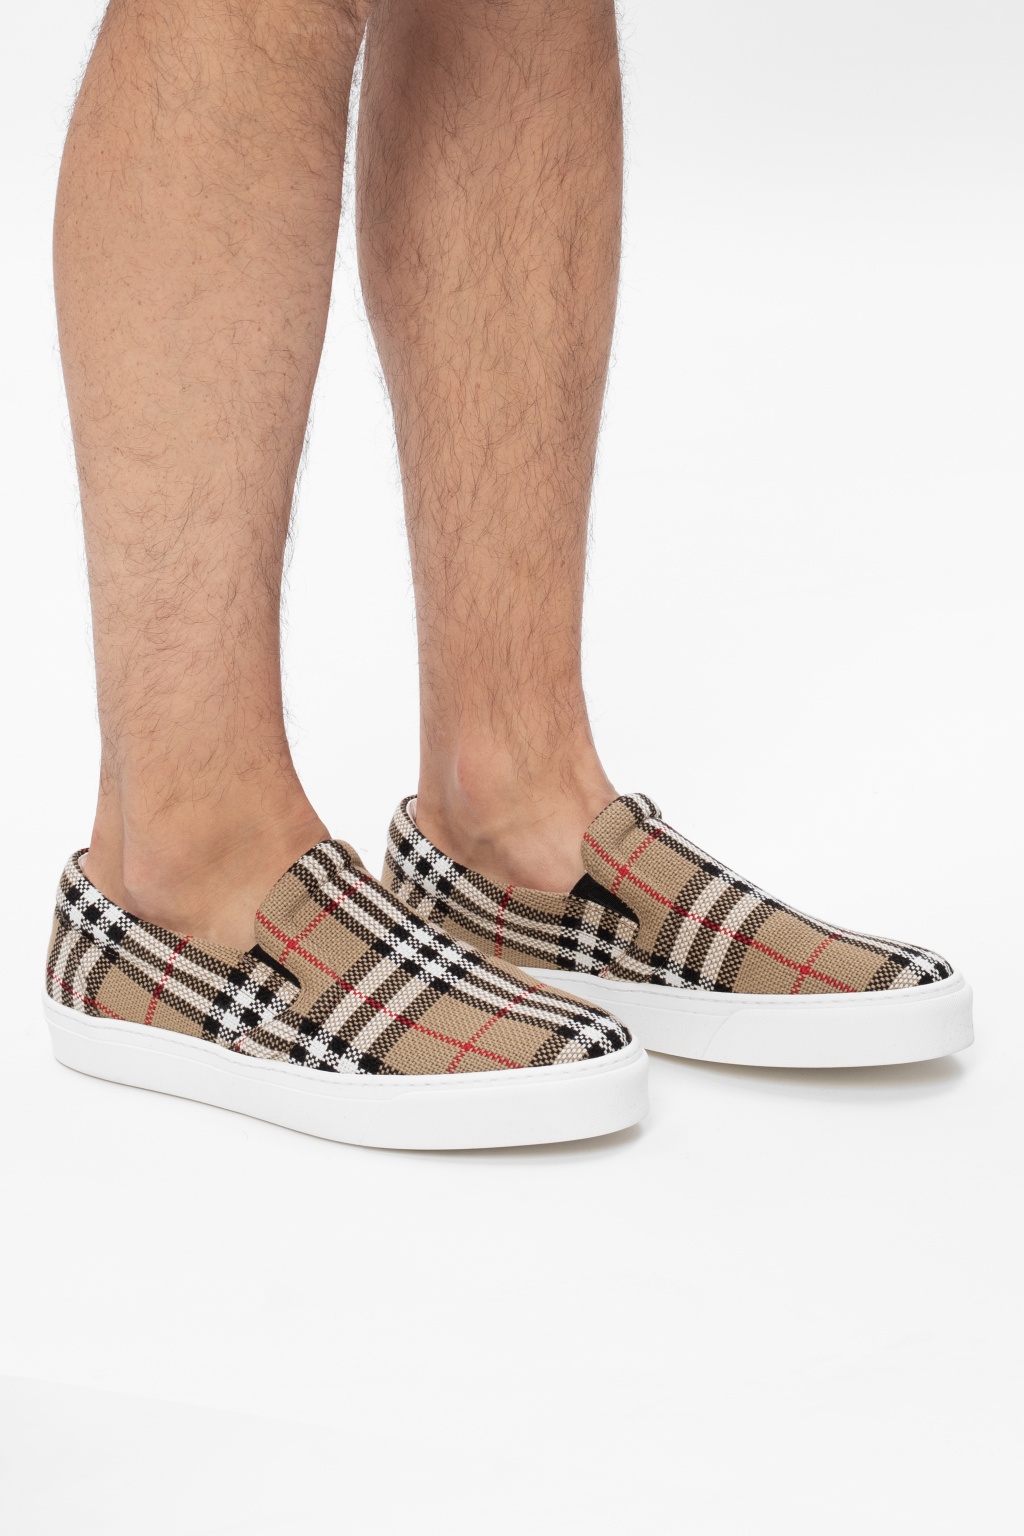 burberry slip on shoes